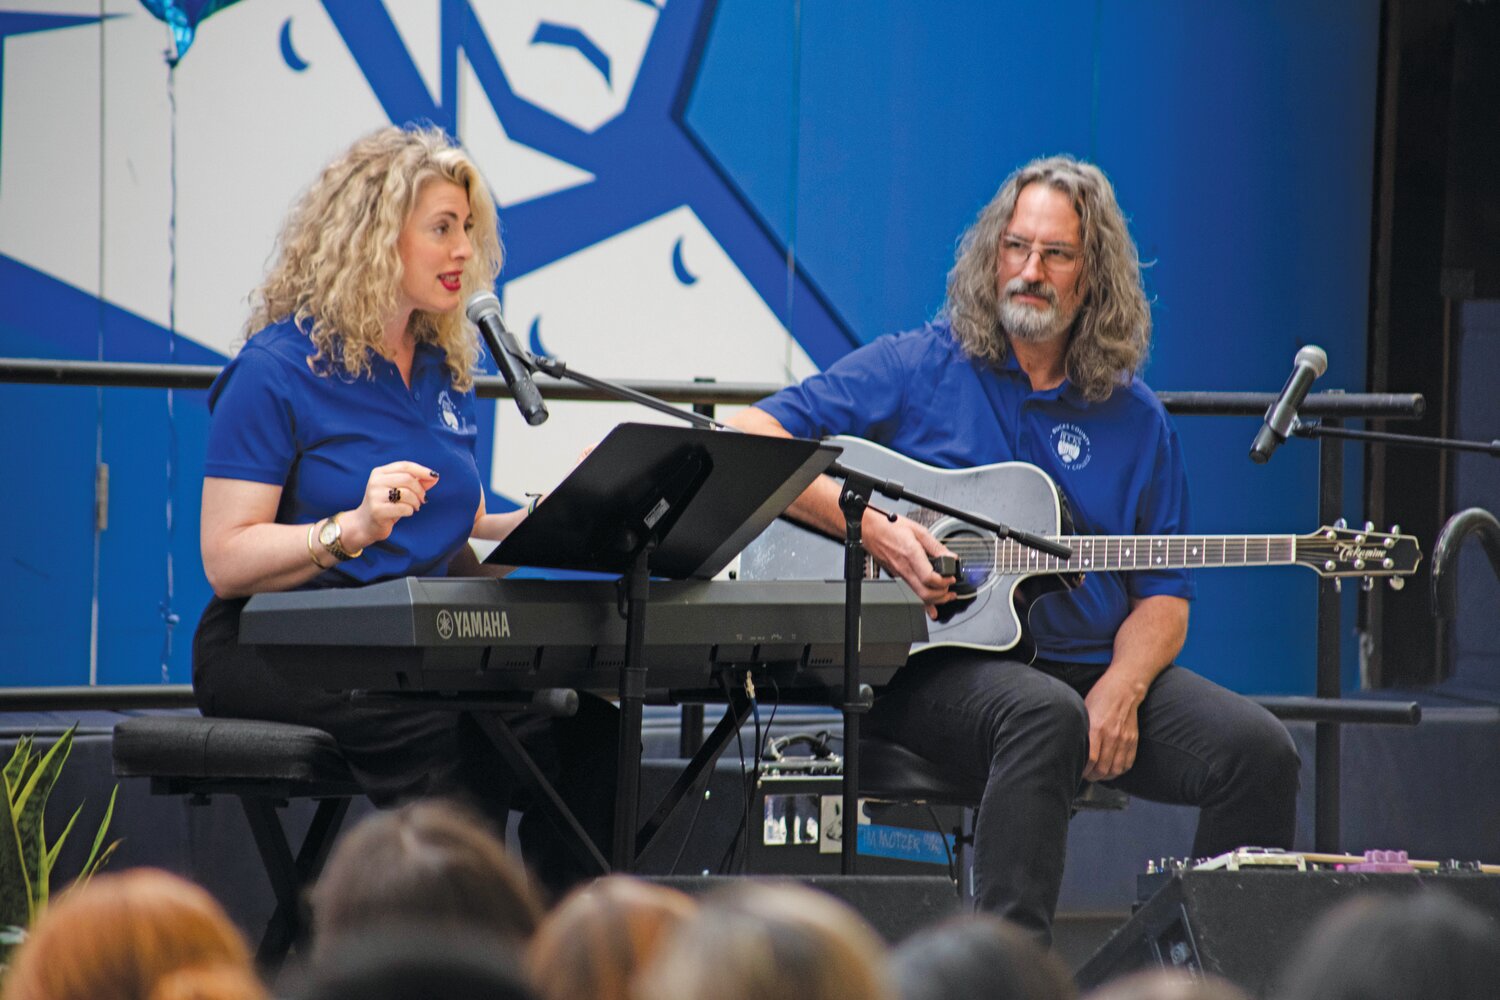 Bucks County native, singer, speaker, emcee, communications consultant, and founder of She Rocked It, Karen Gross, along with Tim Motzer, an accomplished musician who has toured the world, produced his own solo albums, and collaborated on more than 100 others to his credit, performing at the Bucks County Community College President’s New Student Convocation.